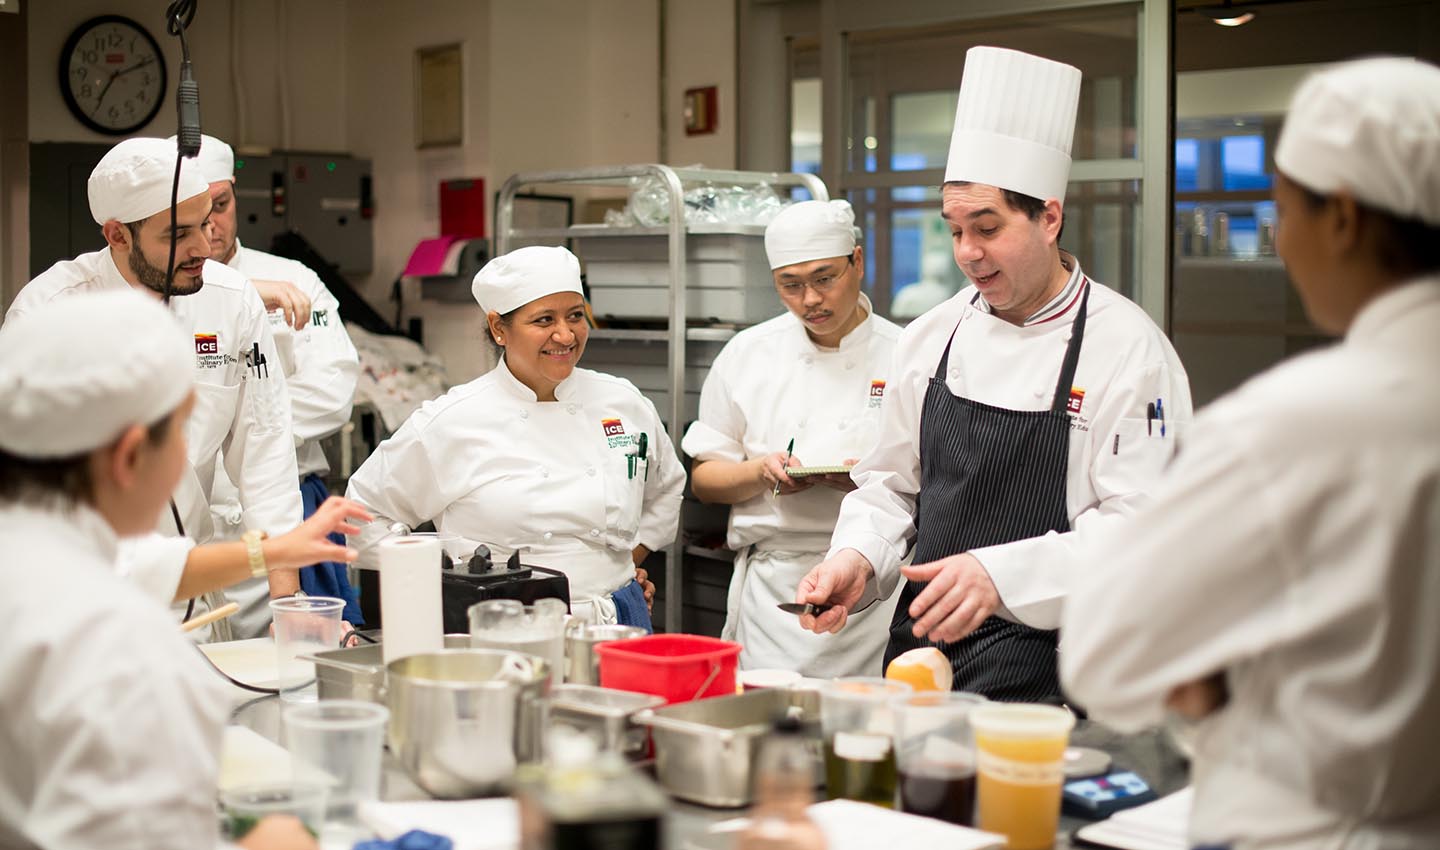 An ICE chef instructor demonstrates a technique to a room full of culinary students at the Institute of Culinary Education